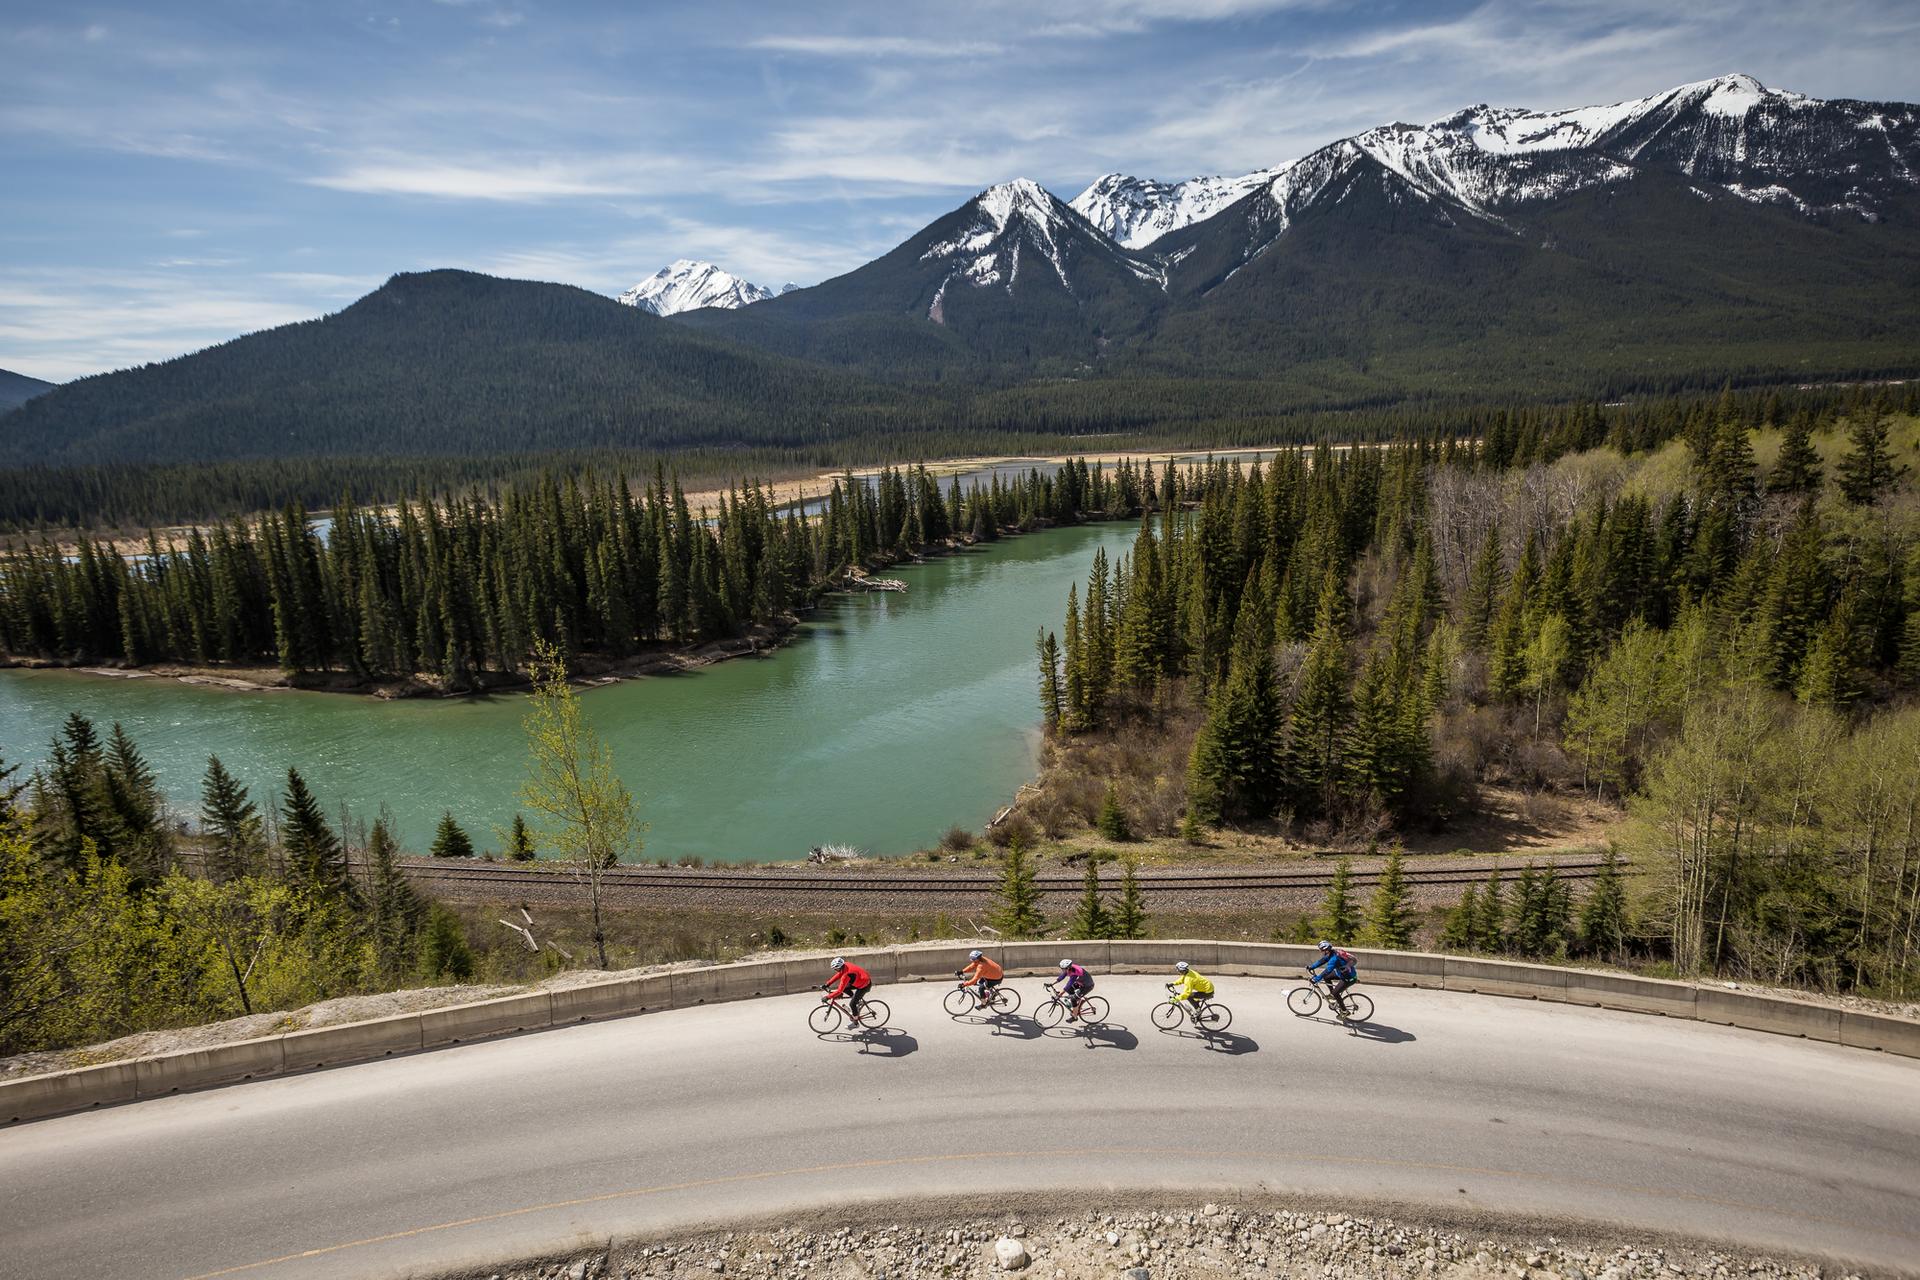 A group of cyclists travel along the icefields parkway in the Rocky mountains